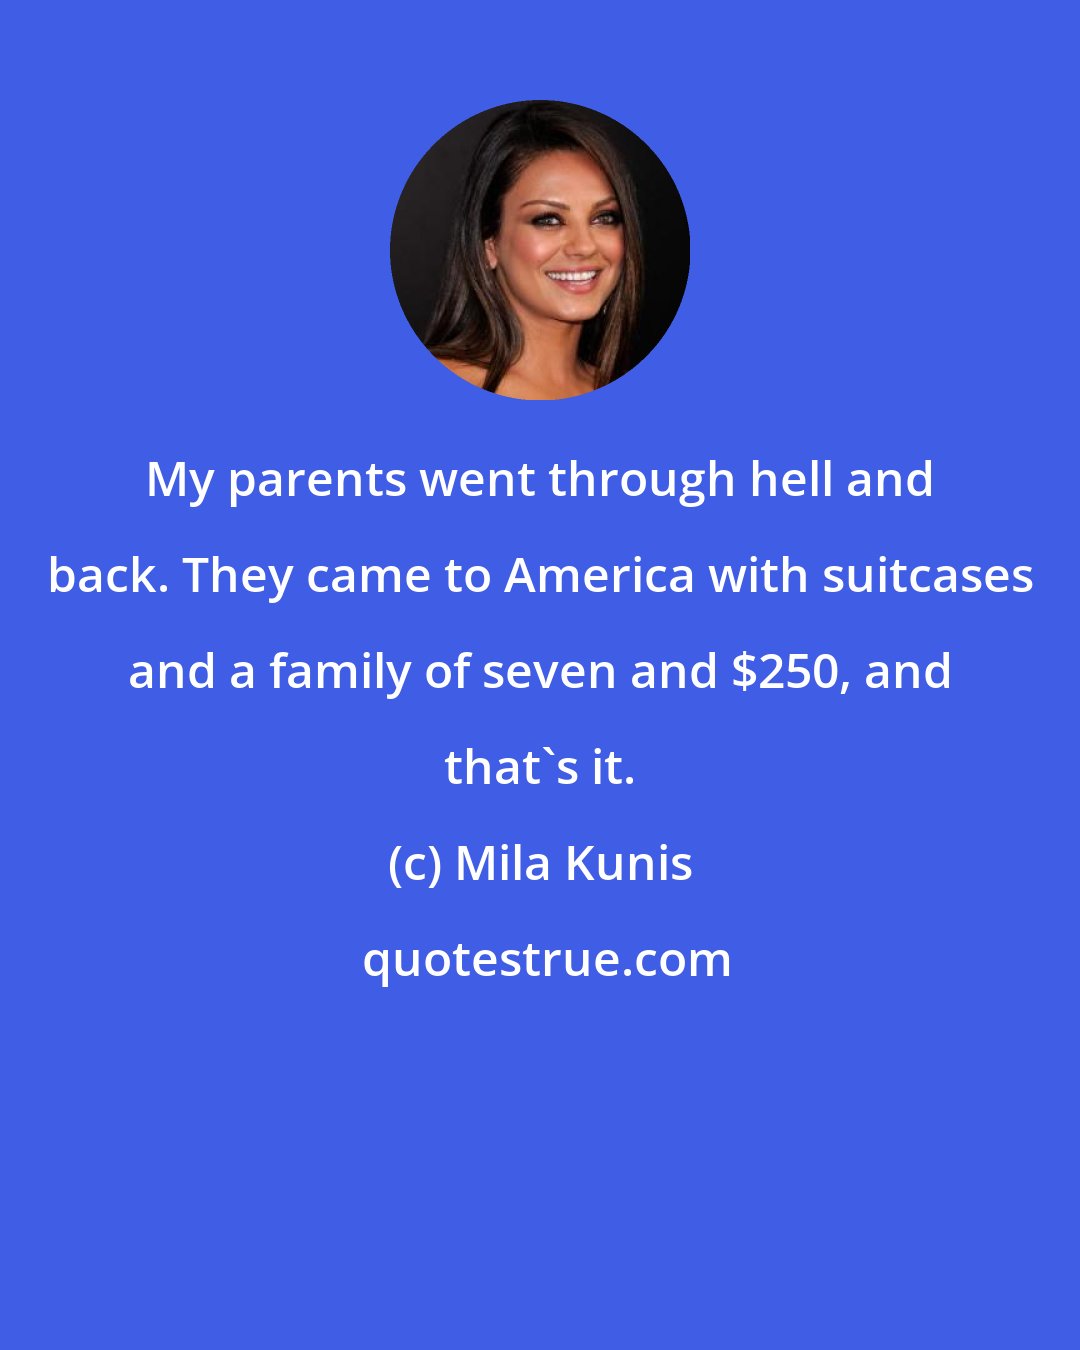 Mila Kunis: My parents went through hell and back. They came to America with suitcases and a family of seven and $250, and that's it.